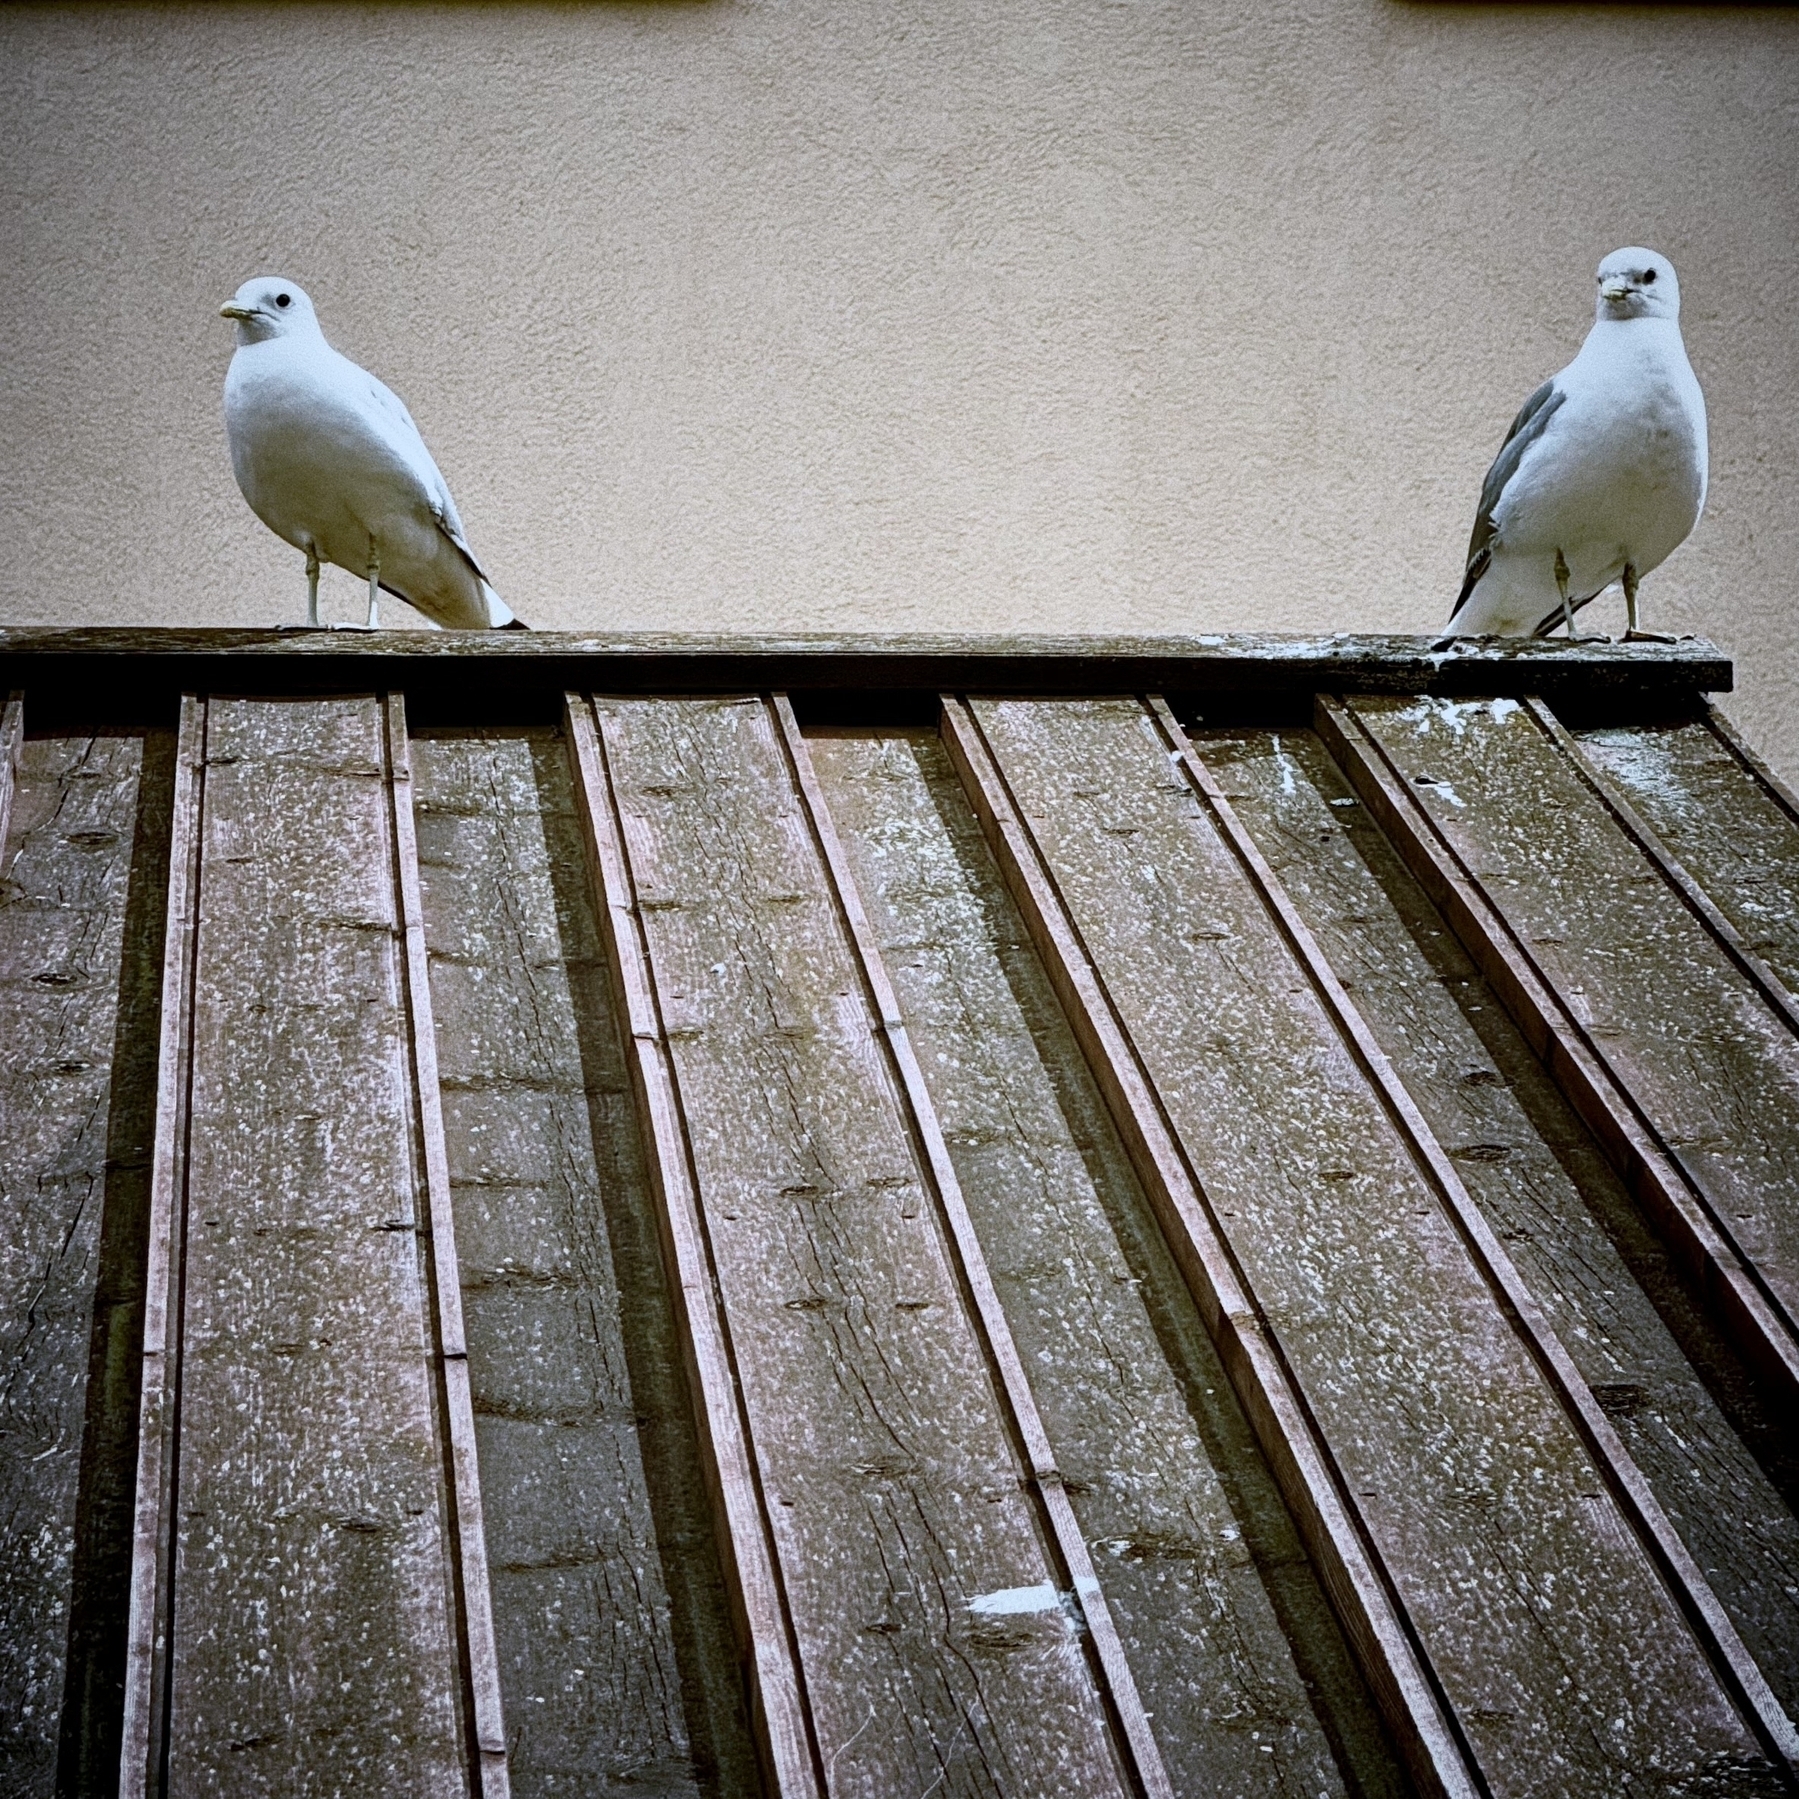 Two seagulls are perched on the edge of a slanted wooden roof.